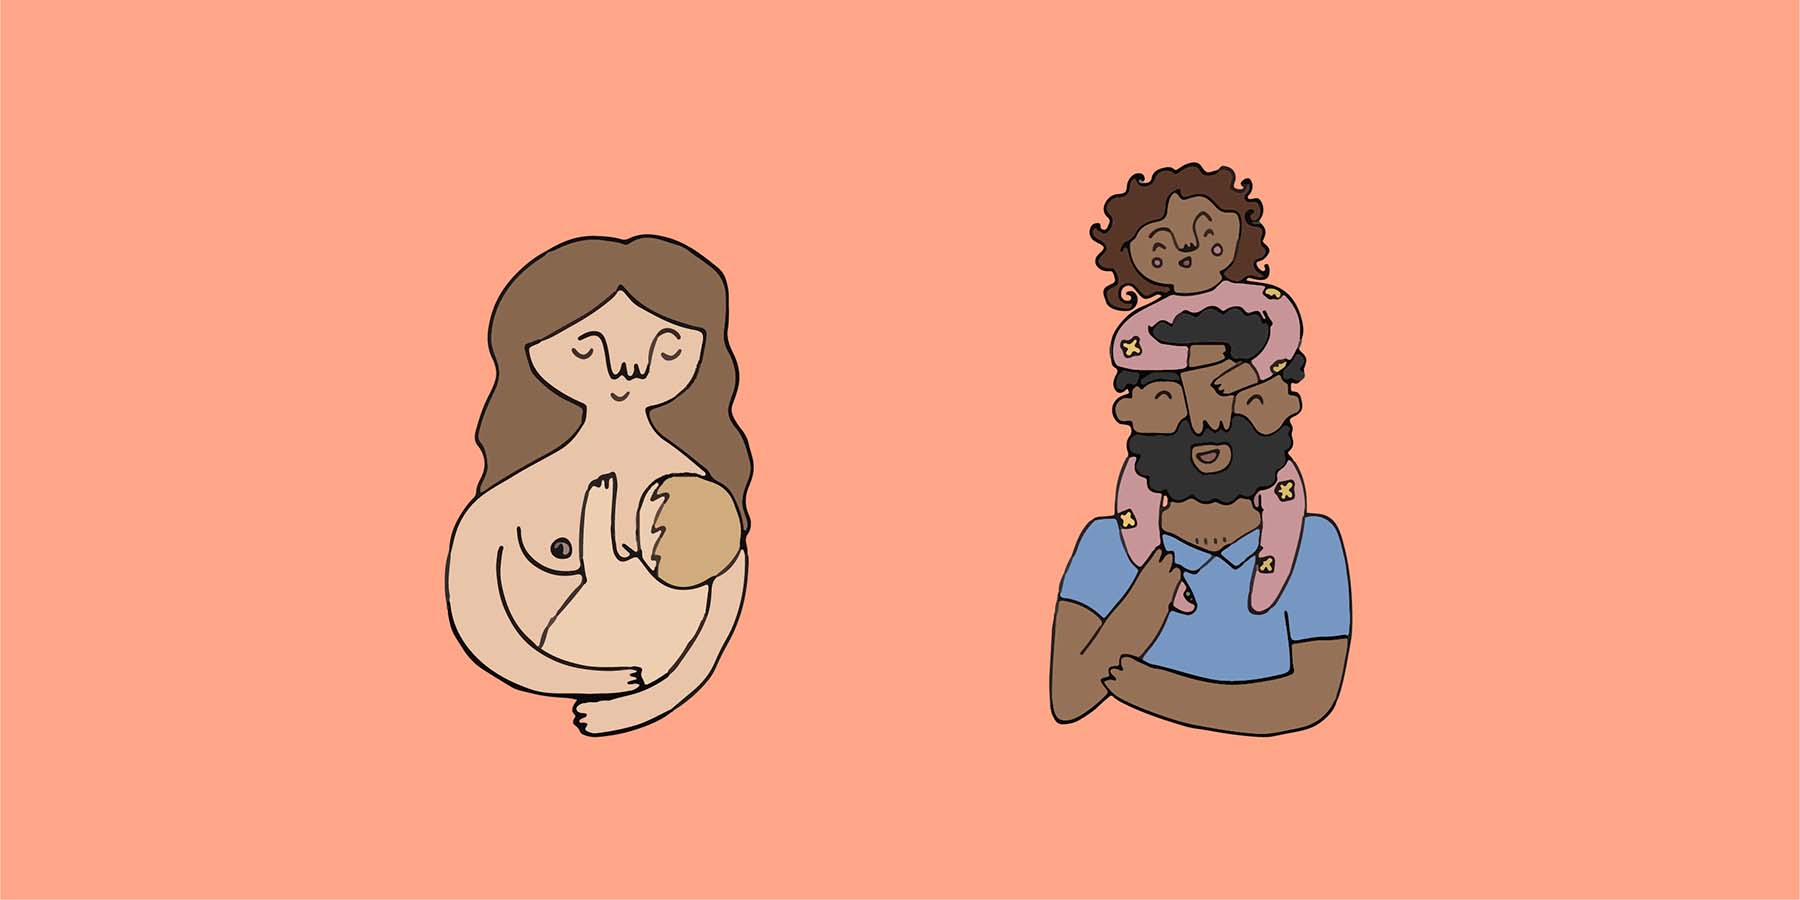 Perinatal Anxiety and Depression Australia website illustrations by Melissa Vallence